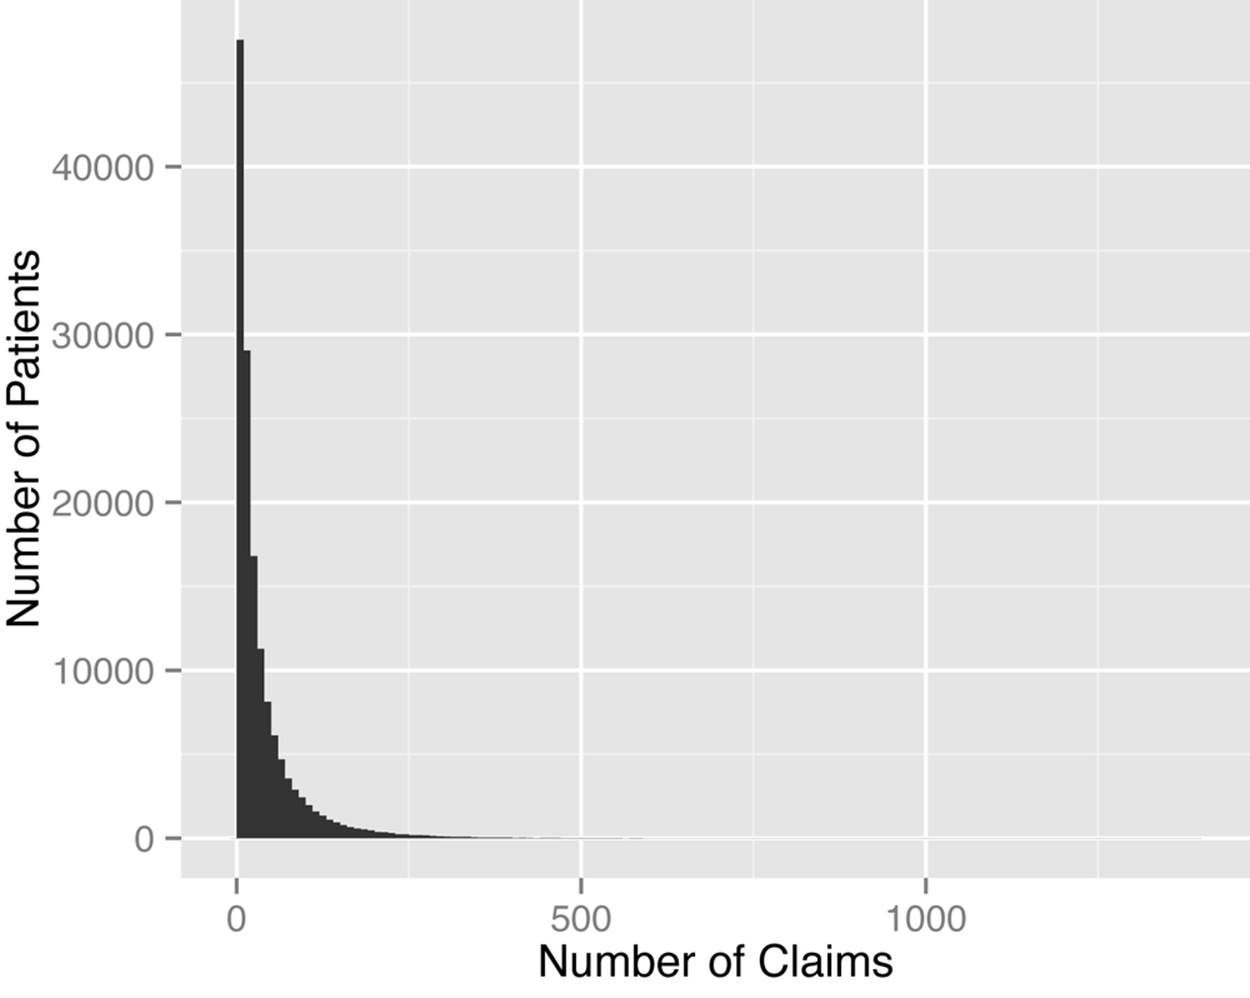 The long tail of claims data for HPN